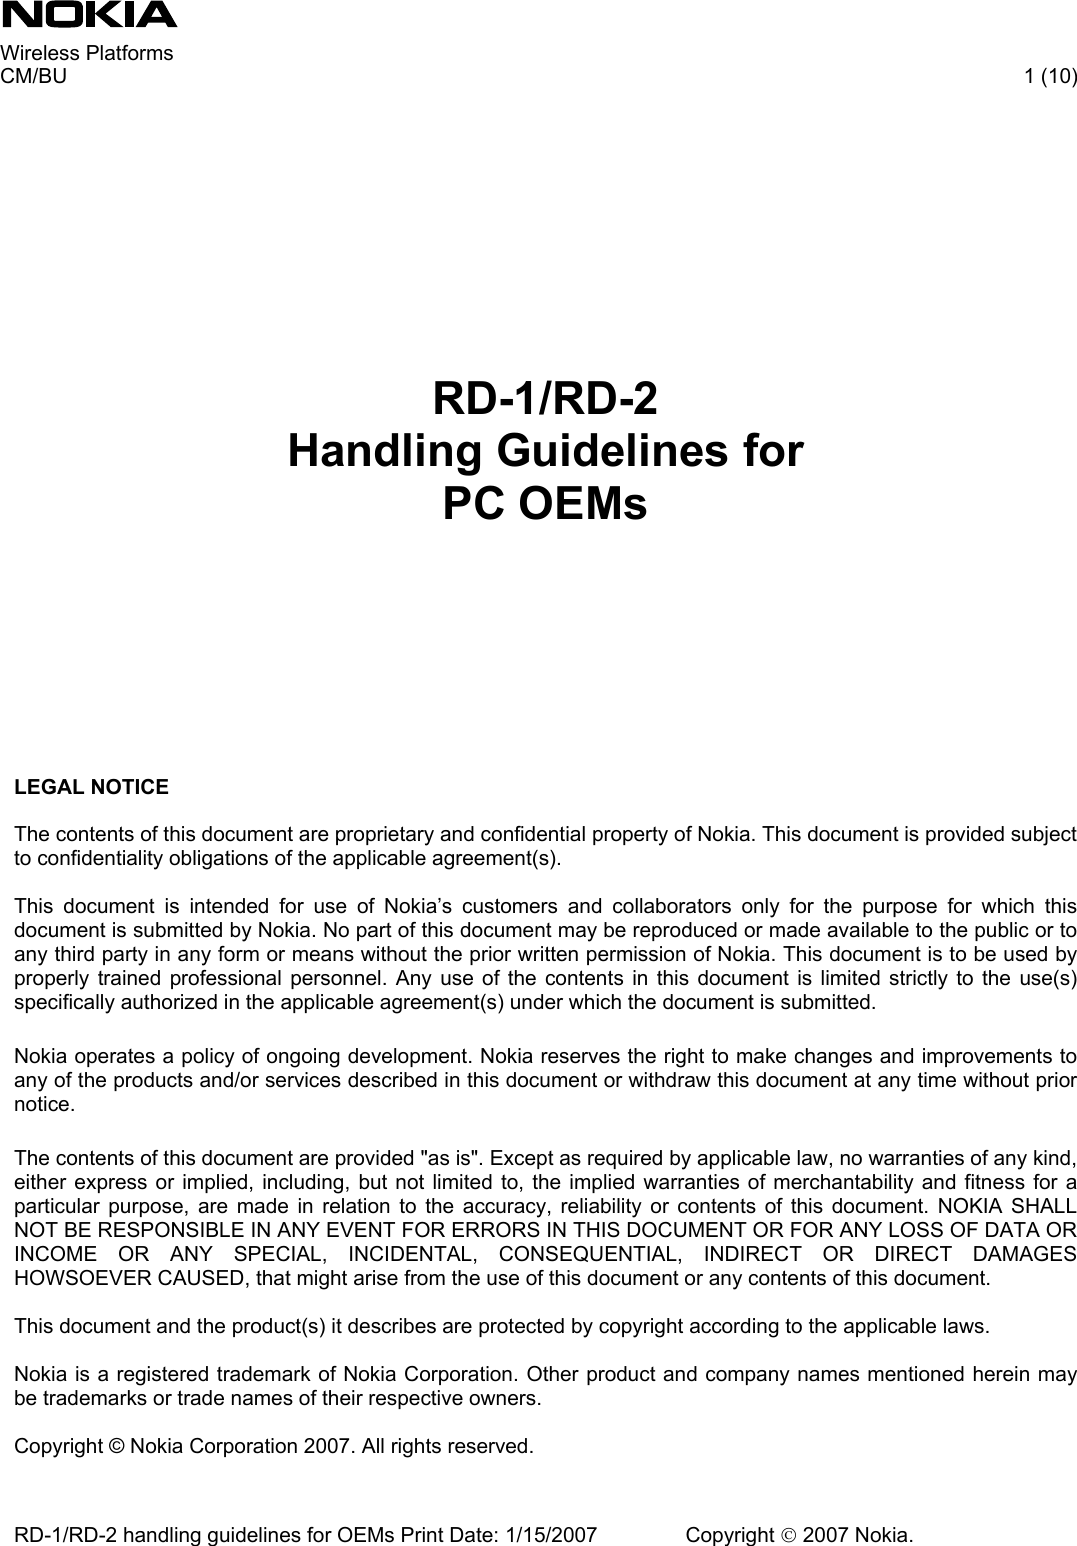     Wireless Platforms     CM/BU   1 (10) RD-1/RD-2 handling guidelines for OEMs Print Date: 1/15/2007   Copyright © 2007 Nokia.           RD-1/RD-2 Handling Guidelines for PC OEMs      LEGAL NOTICE  The contents of this document are proprietary and confidential property of Nokia. This document is provided subject to confidentiality obligations of the applicable agreement(s).   This document is intended for use of Nokia’s customers and collaborators only for the purpose for which this document is submitted by Nokia. No part of this document may be reproduced or made available to the public or to any third party in any form or means without the prior written permission of Nokia. This document is to be used by properly trained professional personnel. Any use of the contents in this document is limited strictly to the use(s) specifically authorized in the applicable agreement(s) under which the document is submitted.   Nokia operates a policy of ongoing development. Nokia reserves the right to make changes and improvements to any of the products and/or services described in this document or withdraw this document at any time without prior notice.   The contents of this document are provided &quot;as is&quot;. Except as required by applicable law, no warranties of any kind, either express or implied, including, but not limited to, the implied warranties of merchantability and fitness for a particular purpose, are made in relation to the accuracy, reliability or contents of this document. NOKIA SHALL NOT BE RESPONSIBLE IN ANY EVENT FOR ERRORS IN THIS DOCUMENT OR FOR ANY LOSS OF DATA OR INCOME OR ANY SPECIAL, INCIDENTAL, CONSEQUENTIAL, INDIRECT OR DIRECT DAMAGES HOWSOEVER CAUSED, that might arise from the use of this document or any contents of this document.   This document and the product(s) it describes are protected by copyright according to the applicable laws.  Nokia is a registered trademark of Nokia Corporation. Other product and company names mentioned herein may be trademarks or trade names of their respective owners.   Copyright © Nokia Corporation 2007. All rights reserved.    